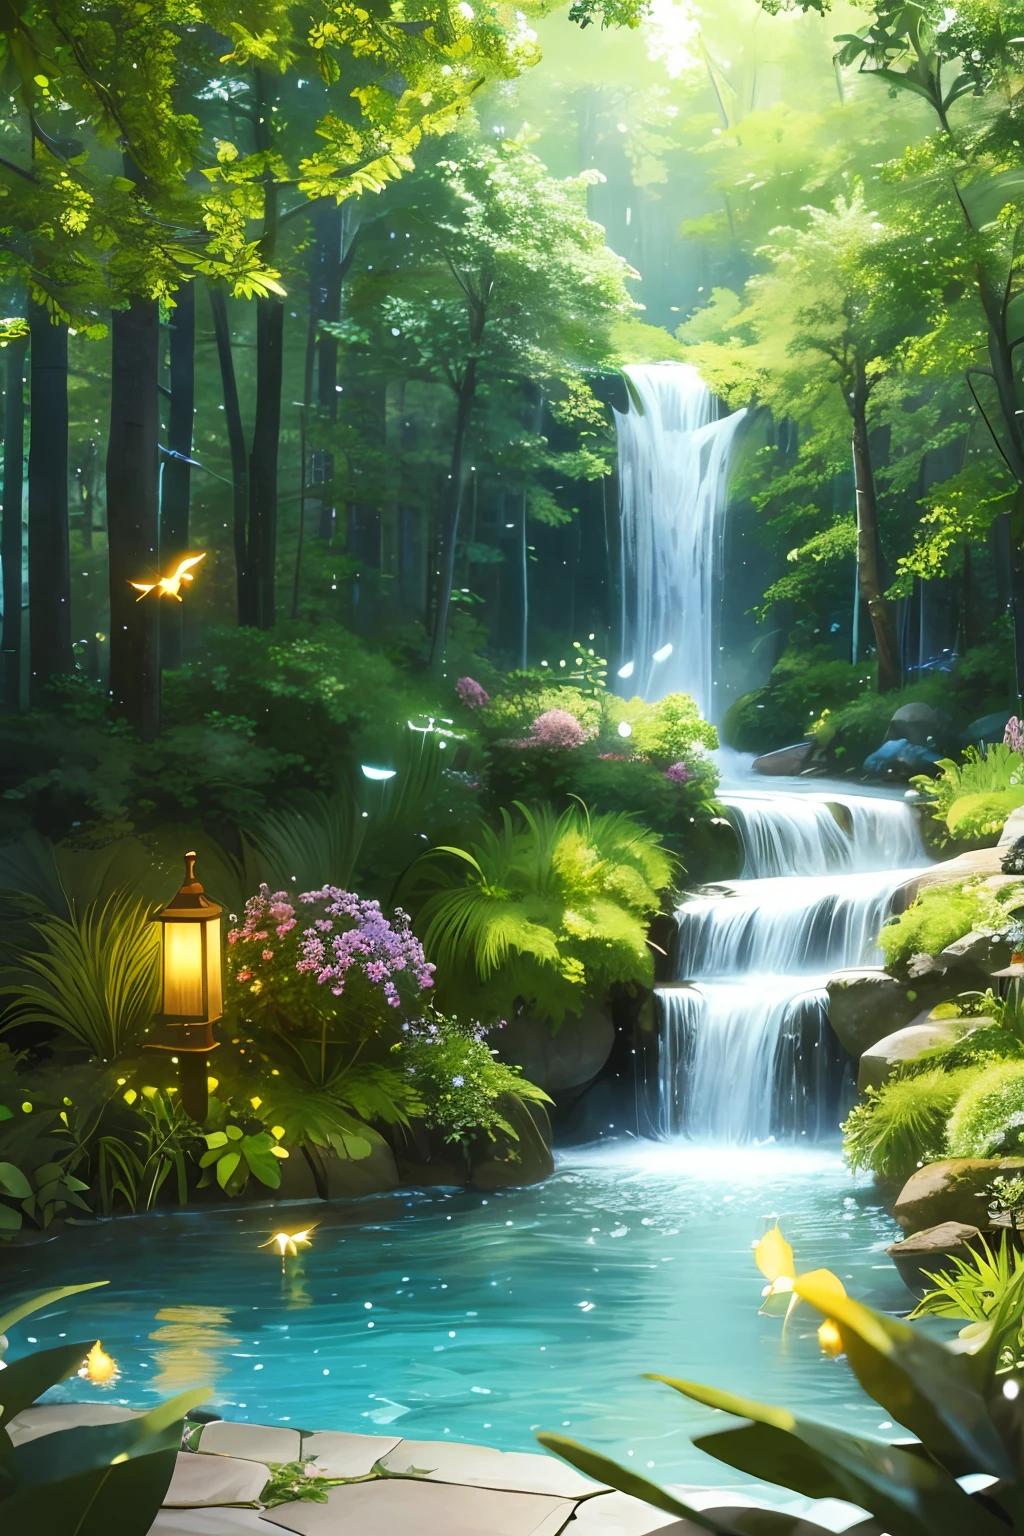 Masterpiece, best quality, (very detailed CG unity 8k wallpaper), (best quality), (best illustration), (best shadows), glow sprite, with a glowing deer, in the swimming pool Drinking water, natural elements in the forest theme. Mysterious forest, beautiful forest, nature, surrounded by flowers, delicate leaves and branches surrounded by fireflies (natural elements), (jungle theme), (leaves), (twigs), (fireflies), (particle effects) etc. 3D , Octane rendering, ray tracing, super detailed